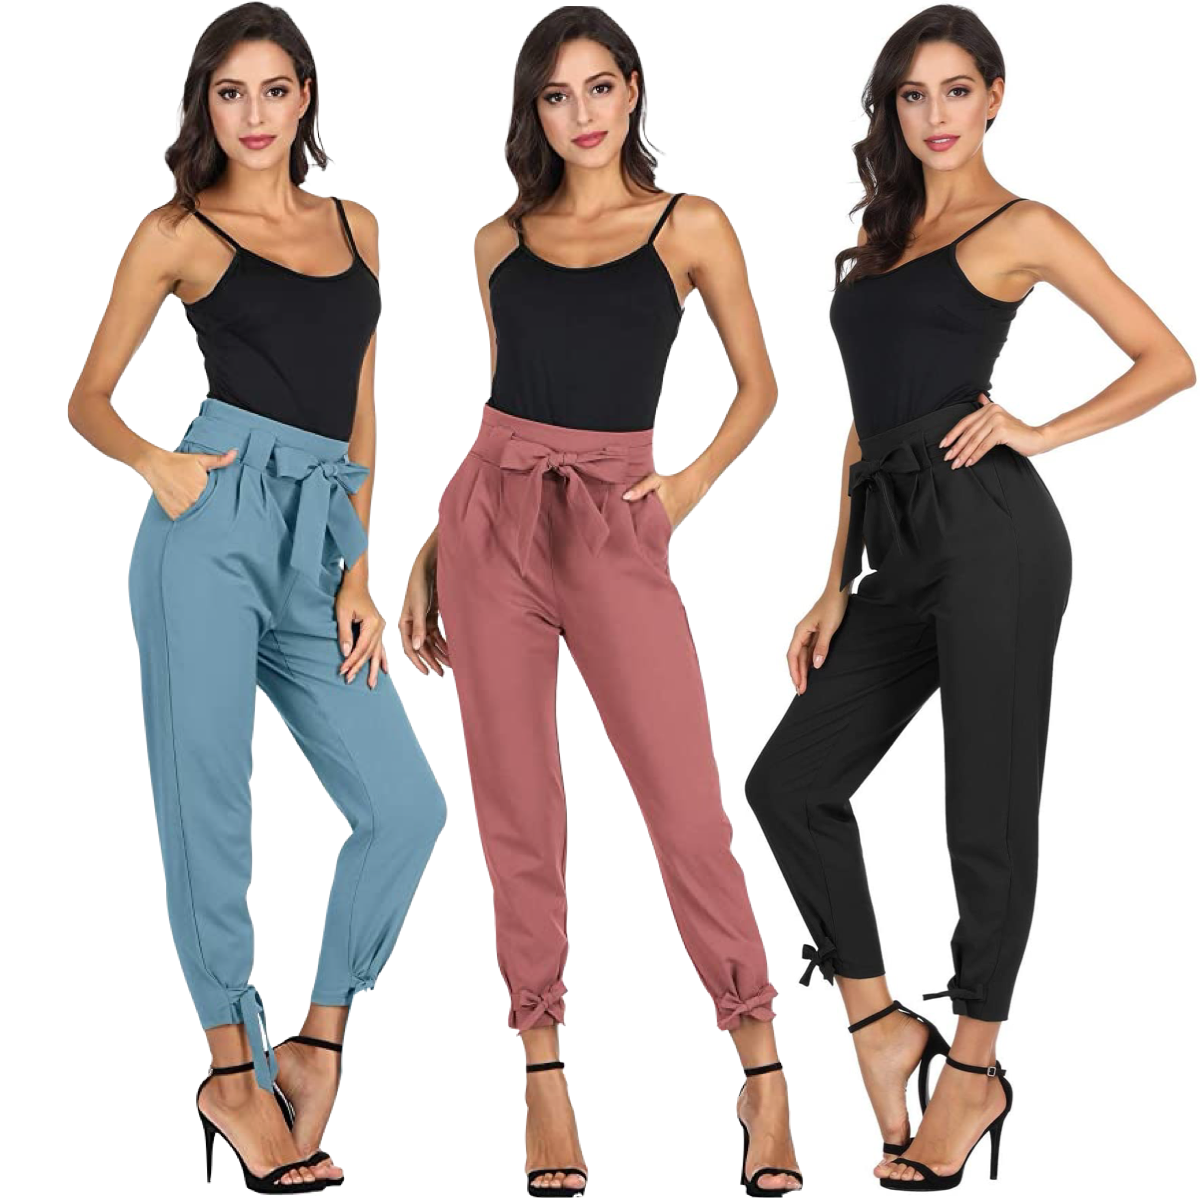 These $33 Tie-Waist Pants Have Over 14,000 Five-Star Reviews on